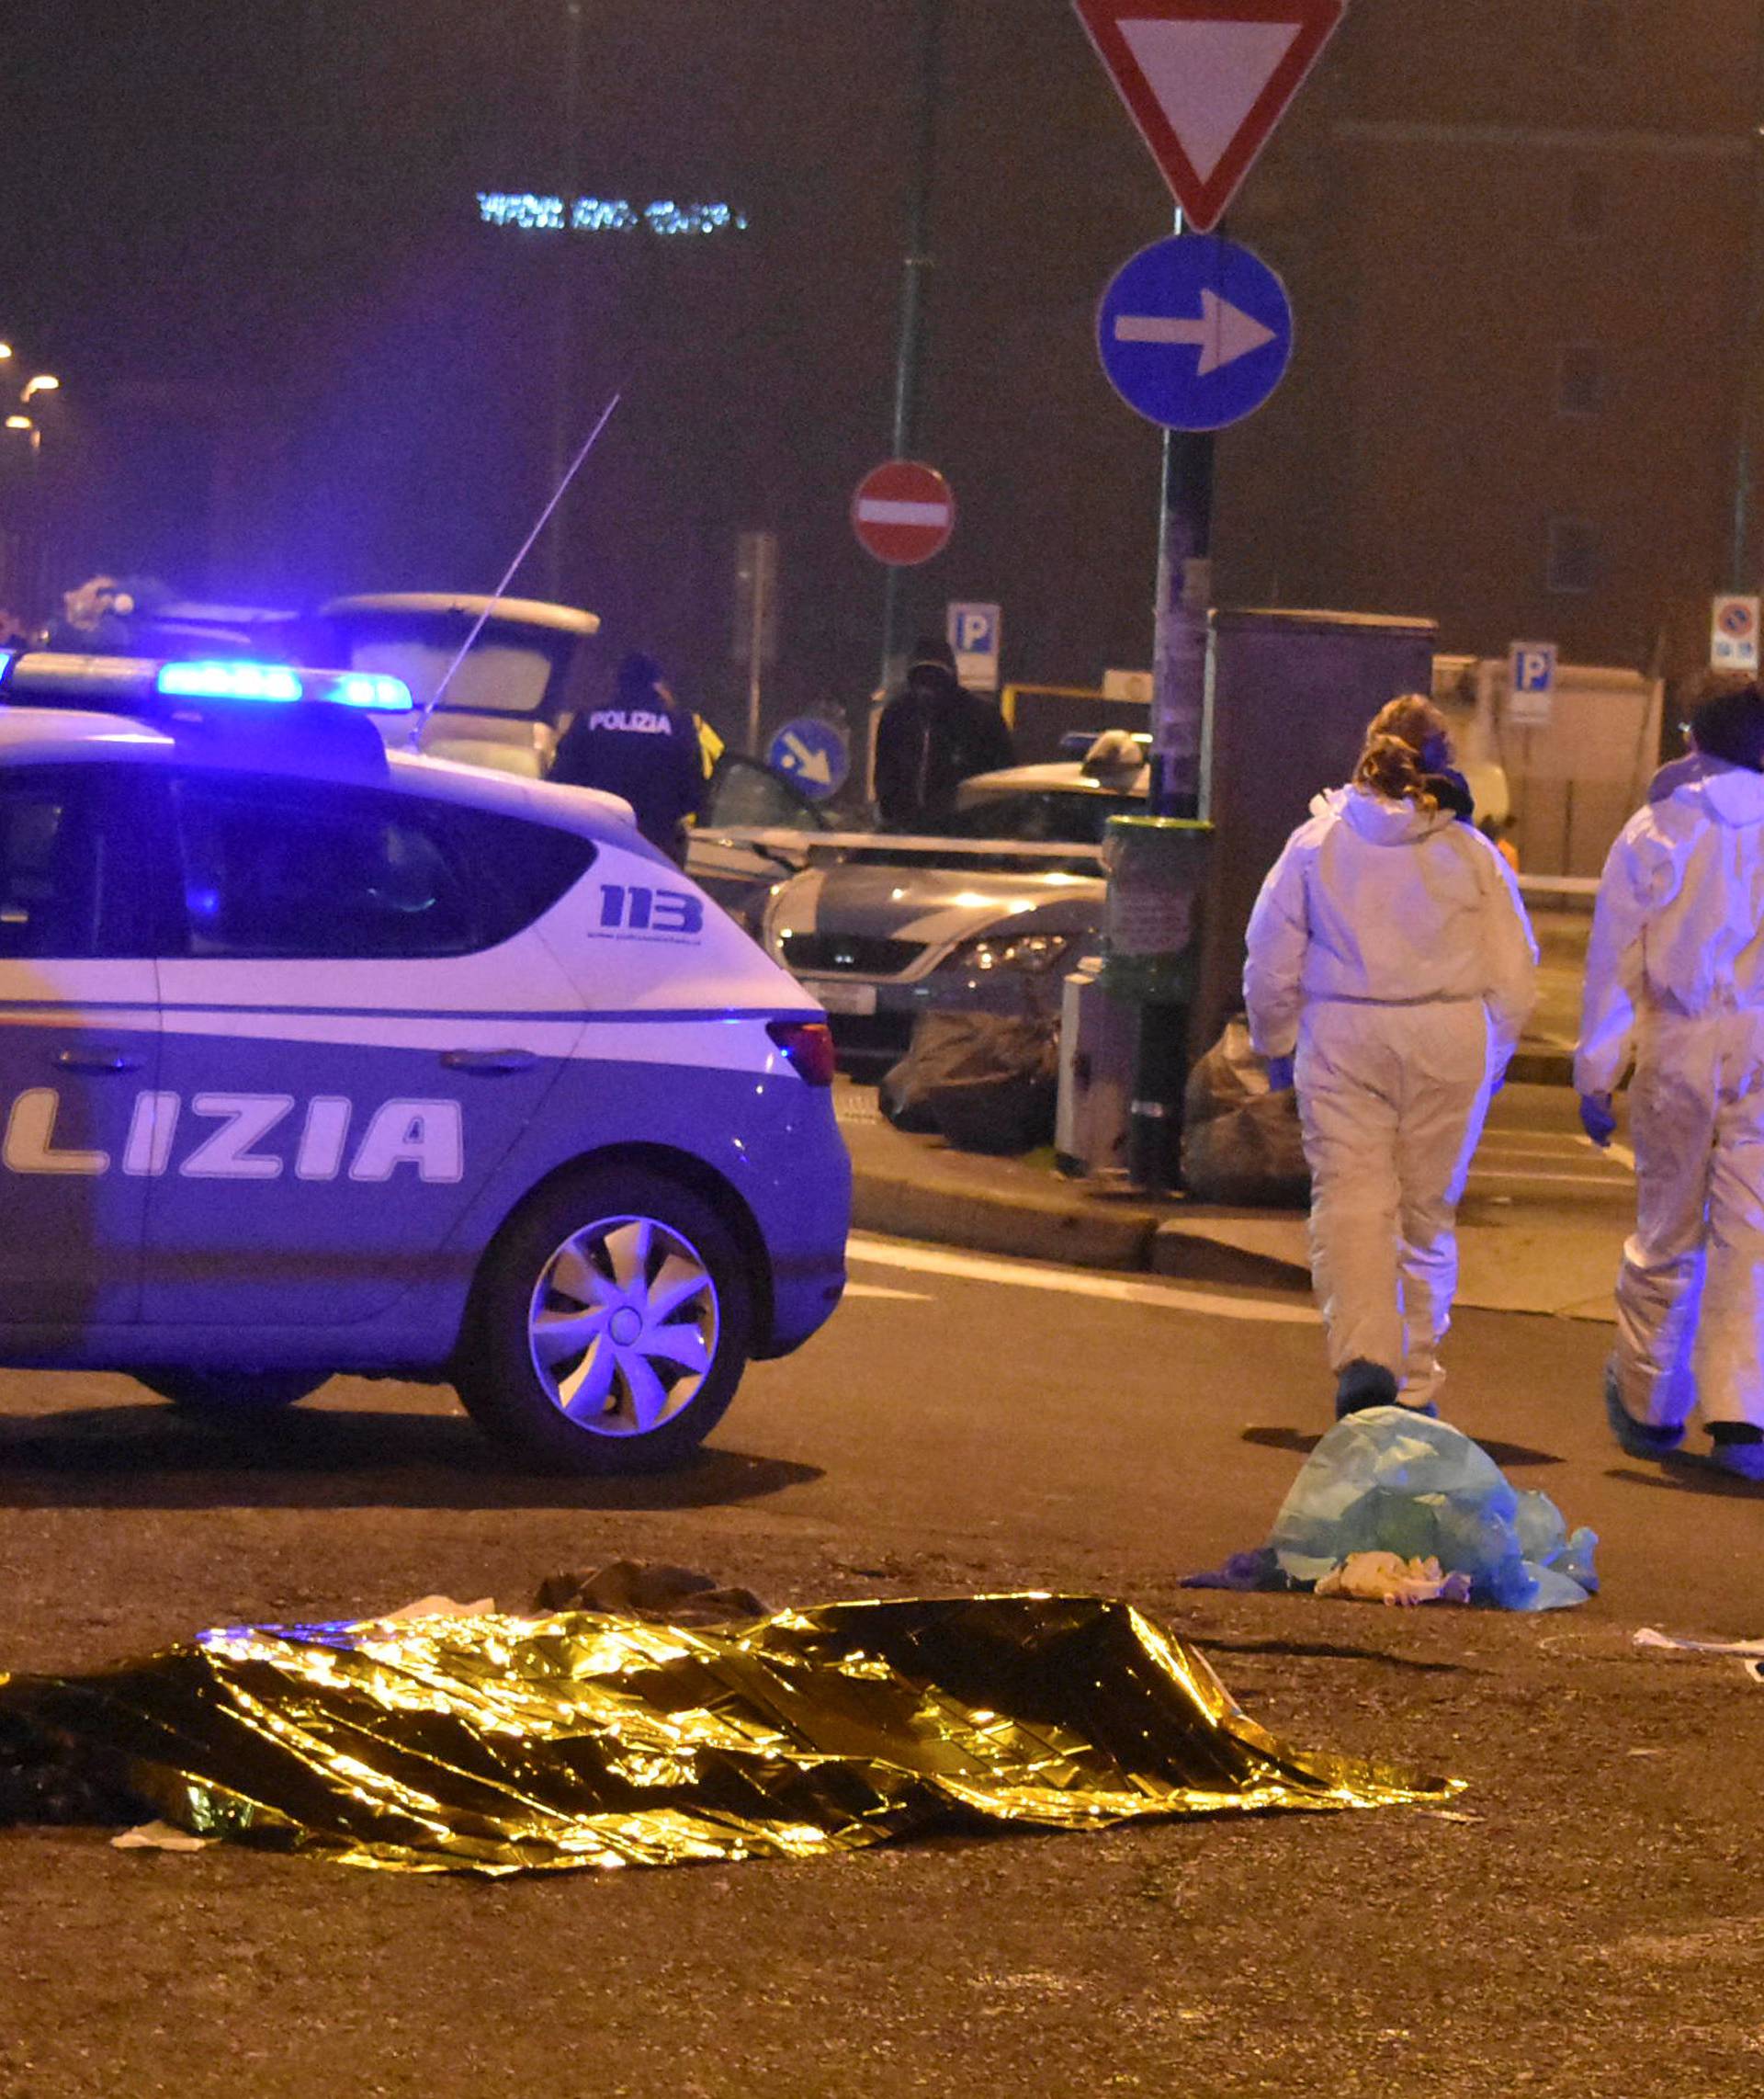 The body of Anis Amri, the suspect in the Berlin Christmas market truck attack, is seen covered with a thermal blanket next to Italian officers in a suburb of the northern Italian city of Milan